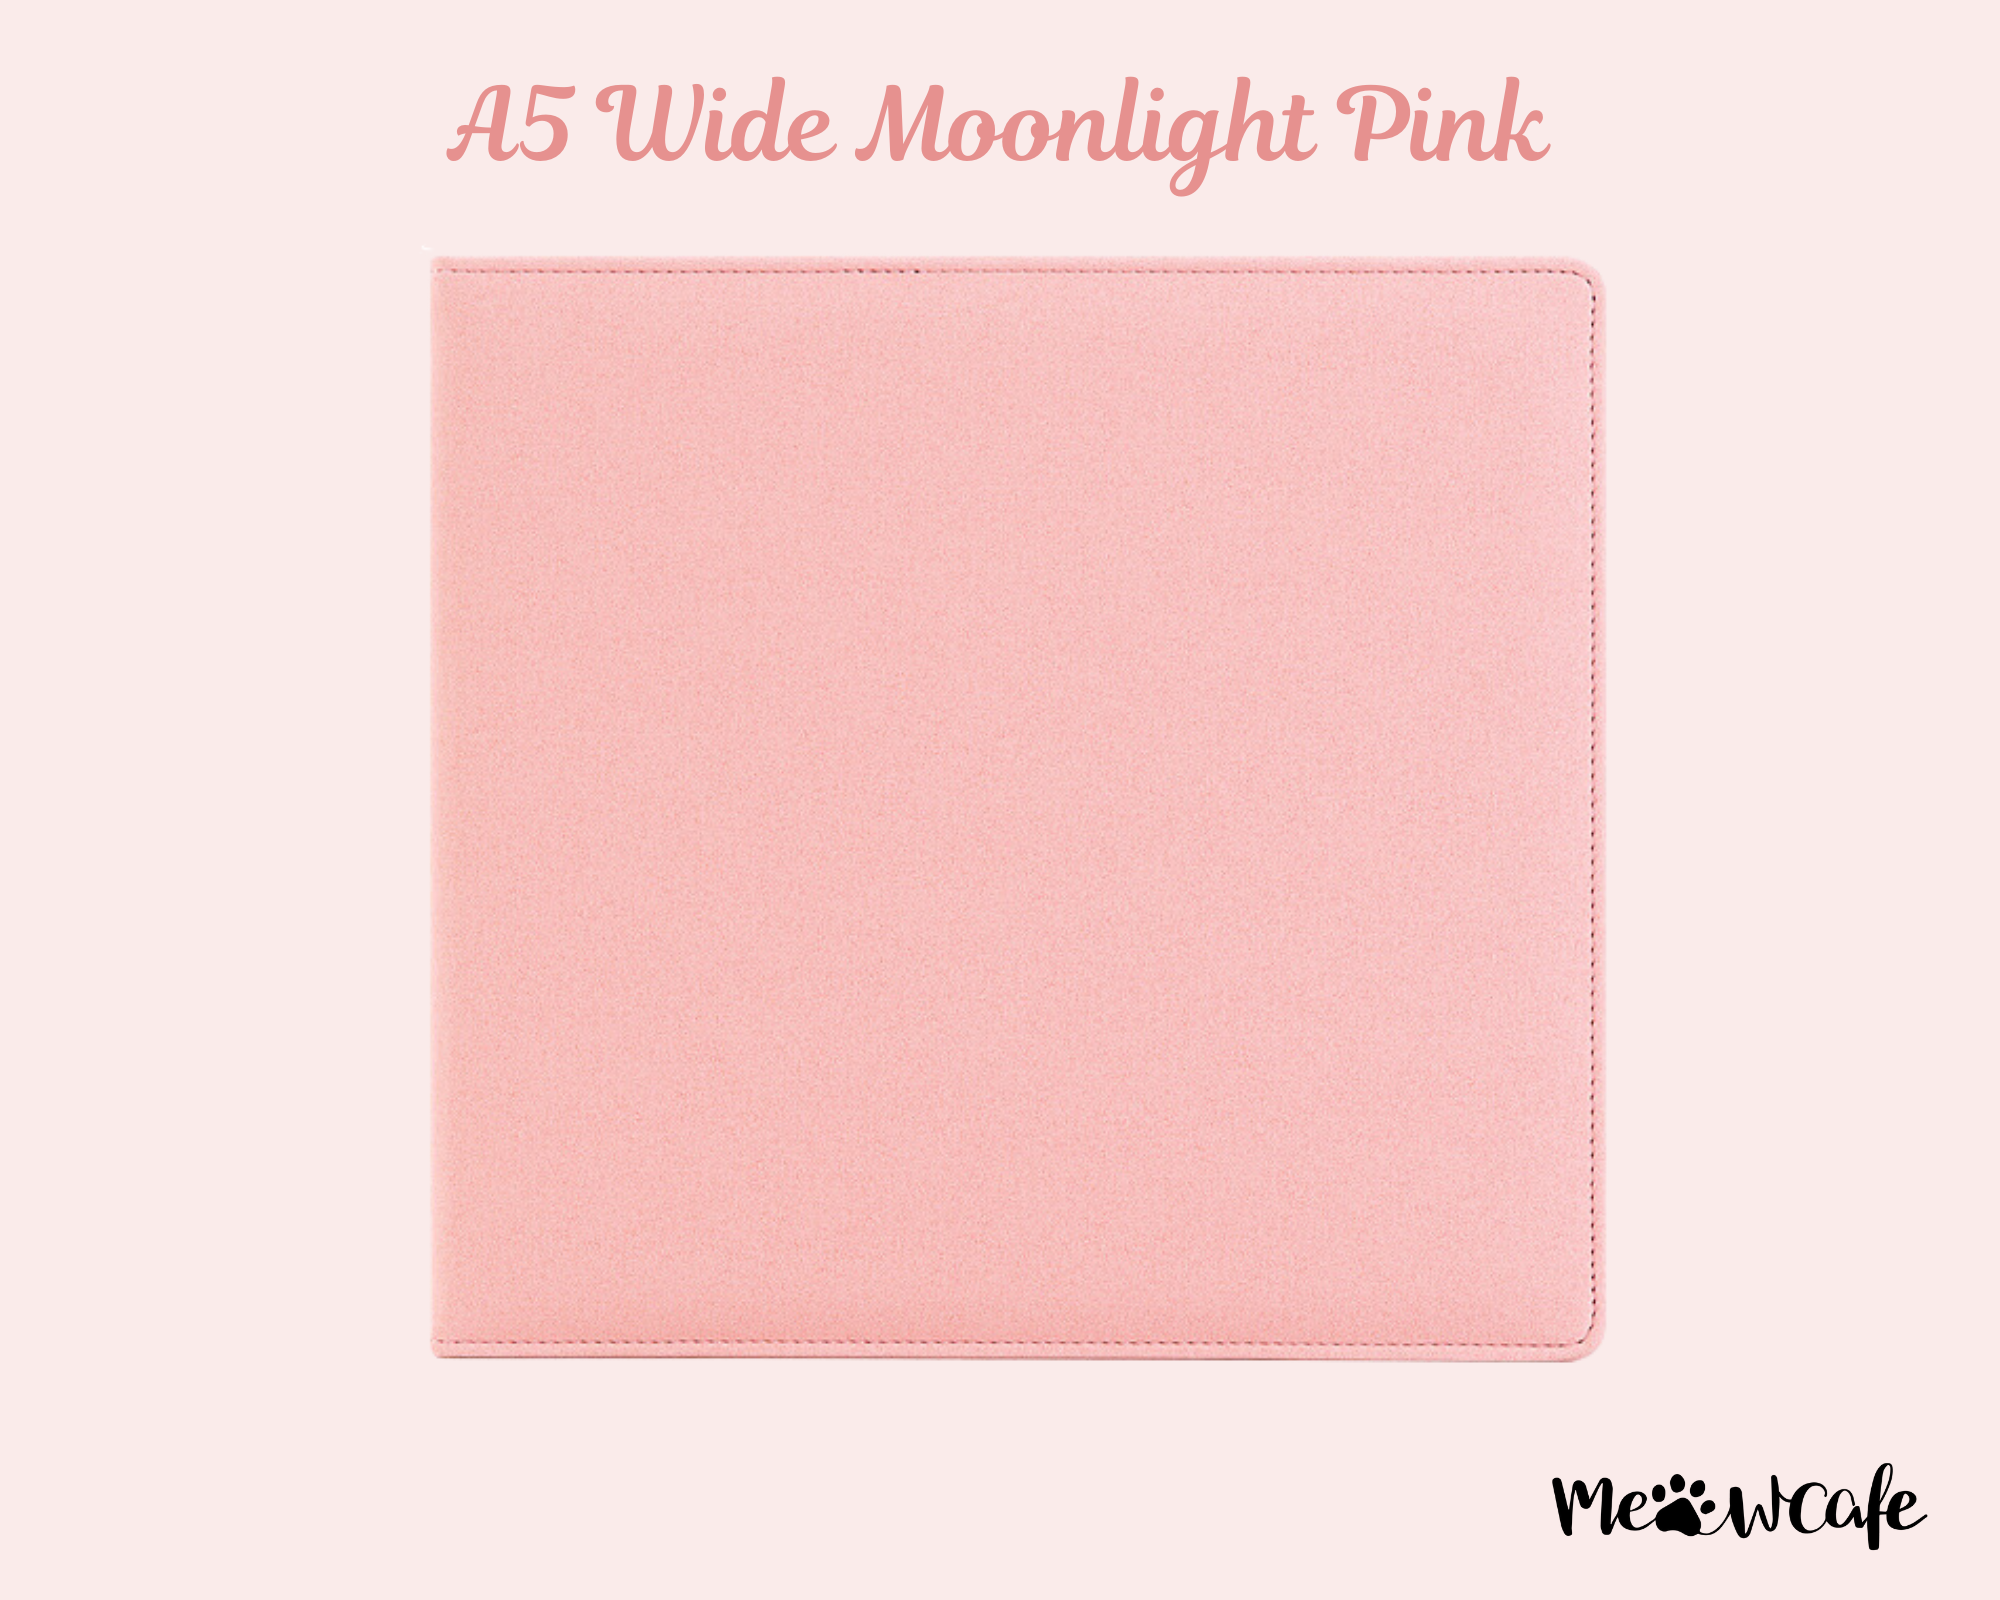 K-KEEP [A5 Extra-Wide] Binder - [1 inch] - [Moonlight Series] | Soft PU Leather Binder with 1 inch D-Ring